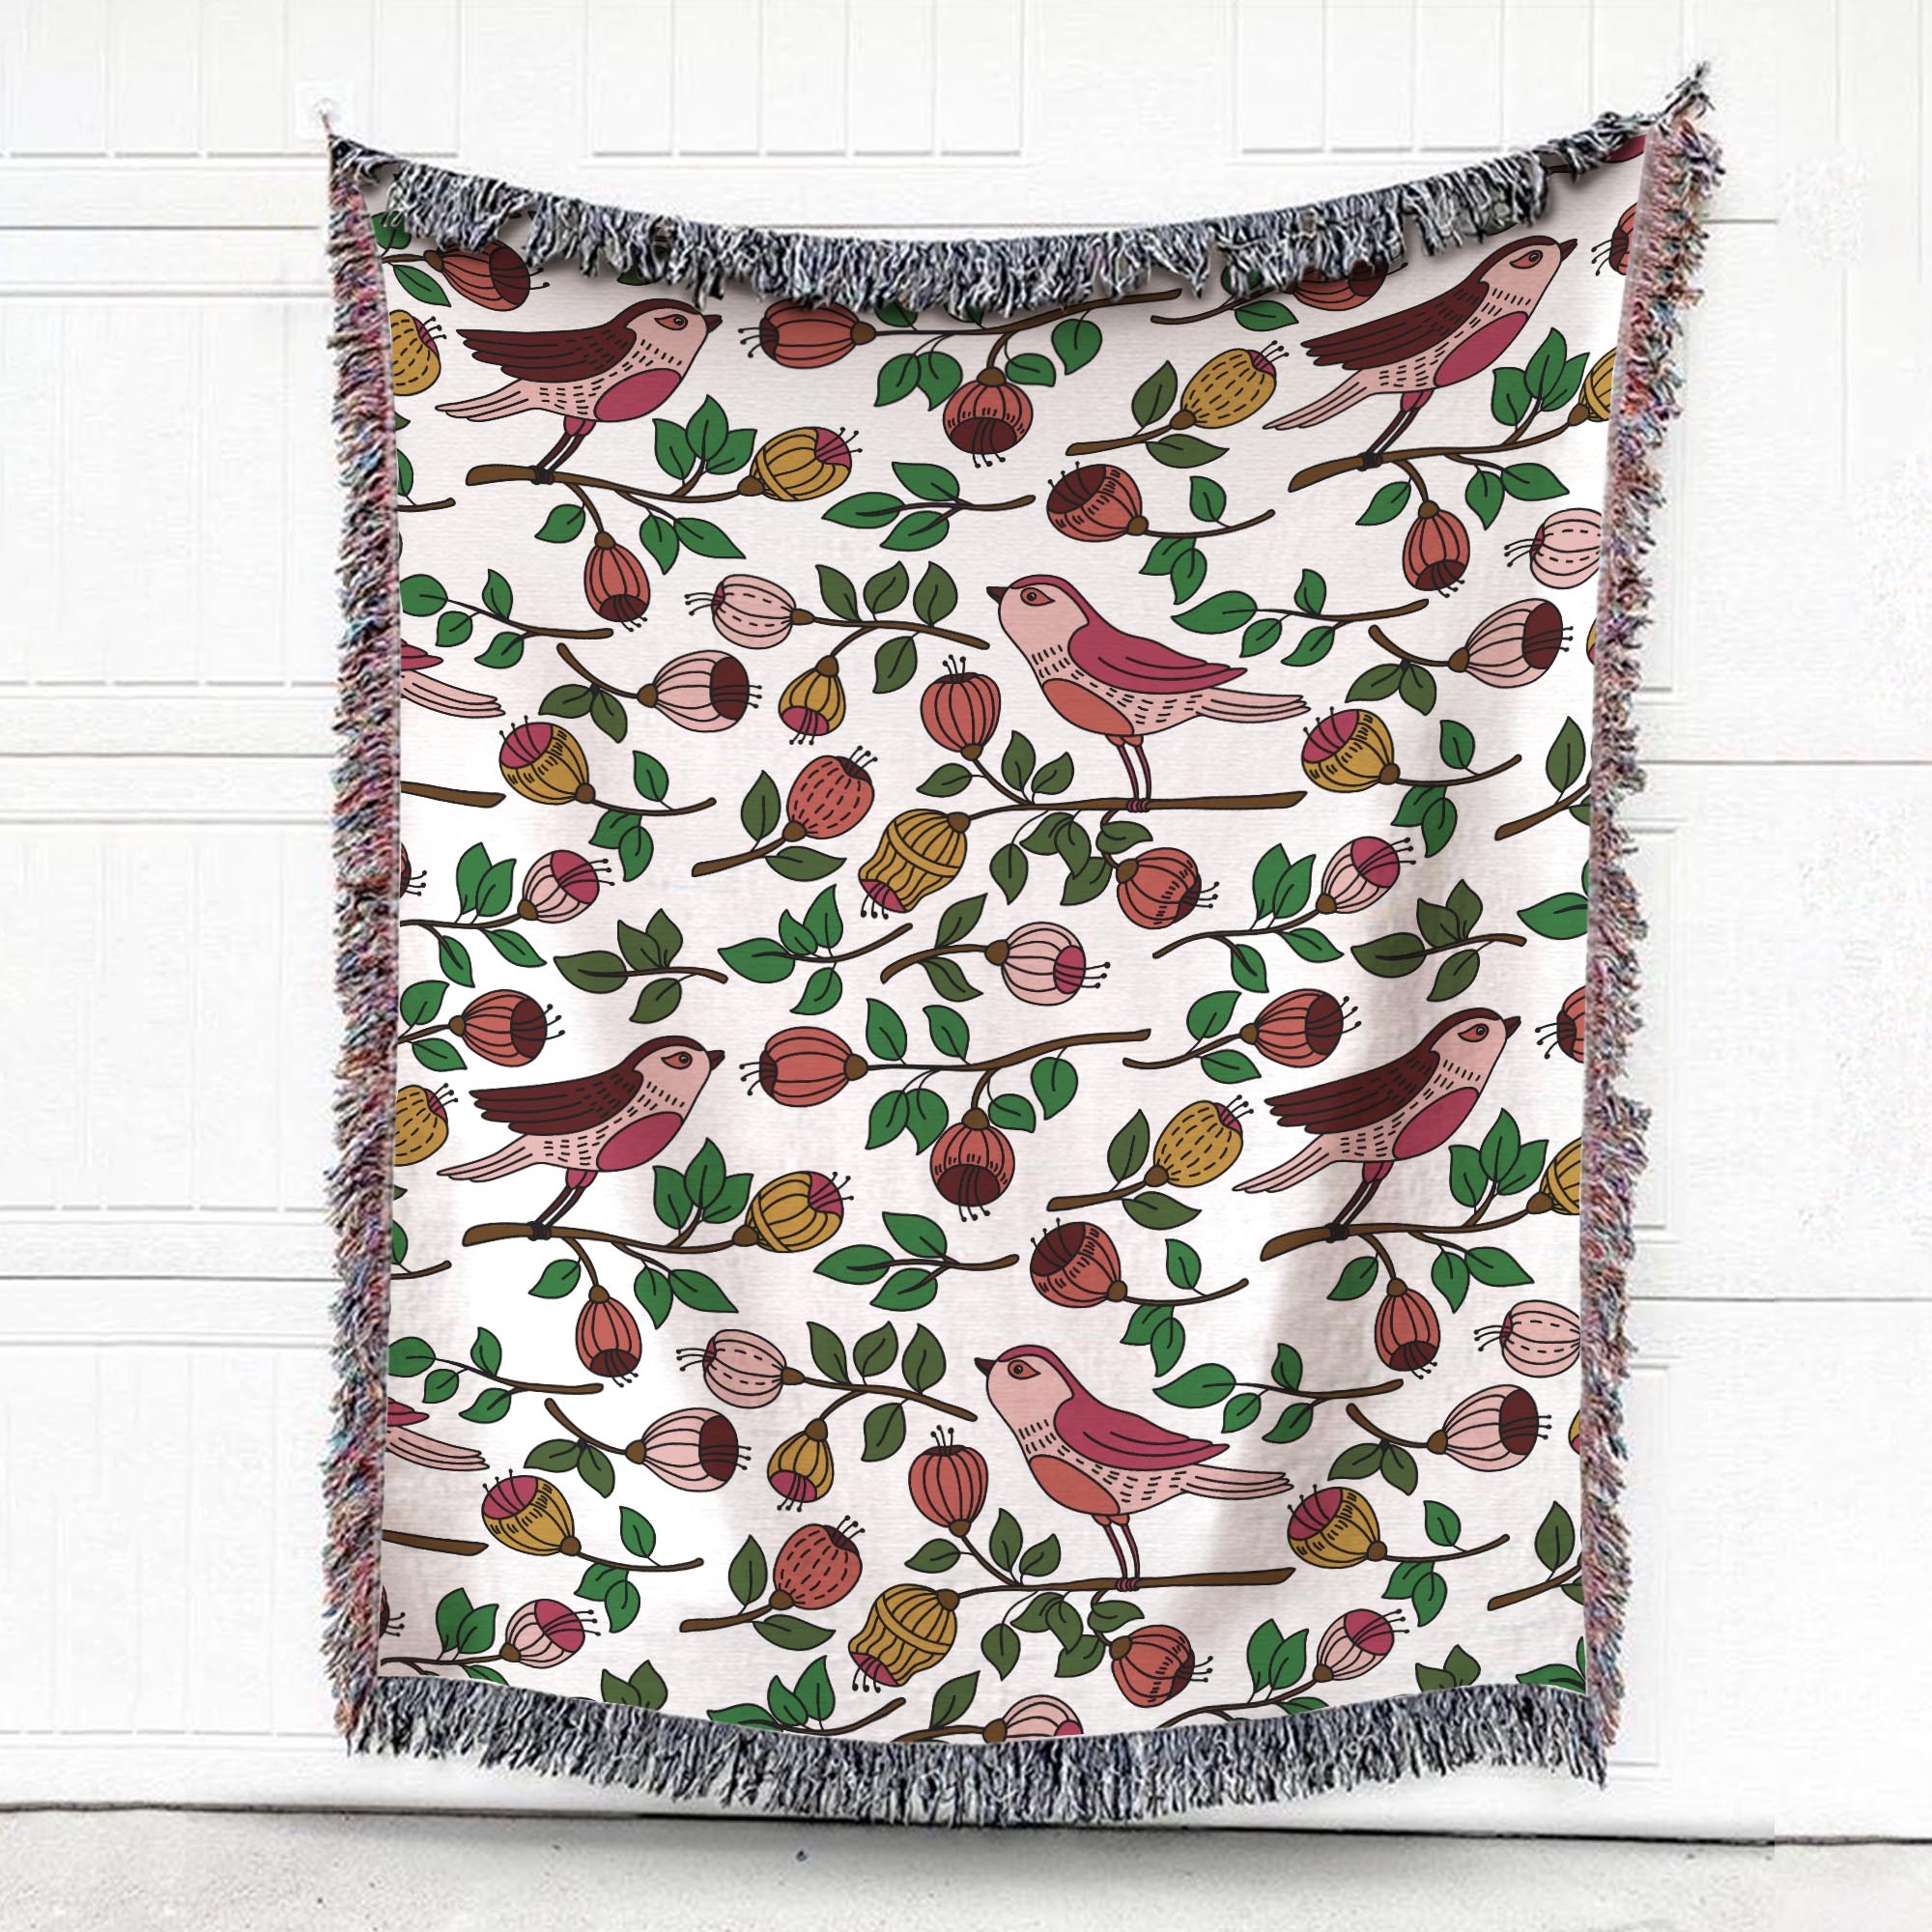 Flower Buds And Pink Birds Woven Blanket